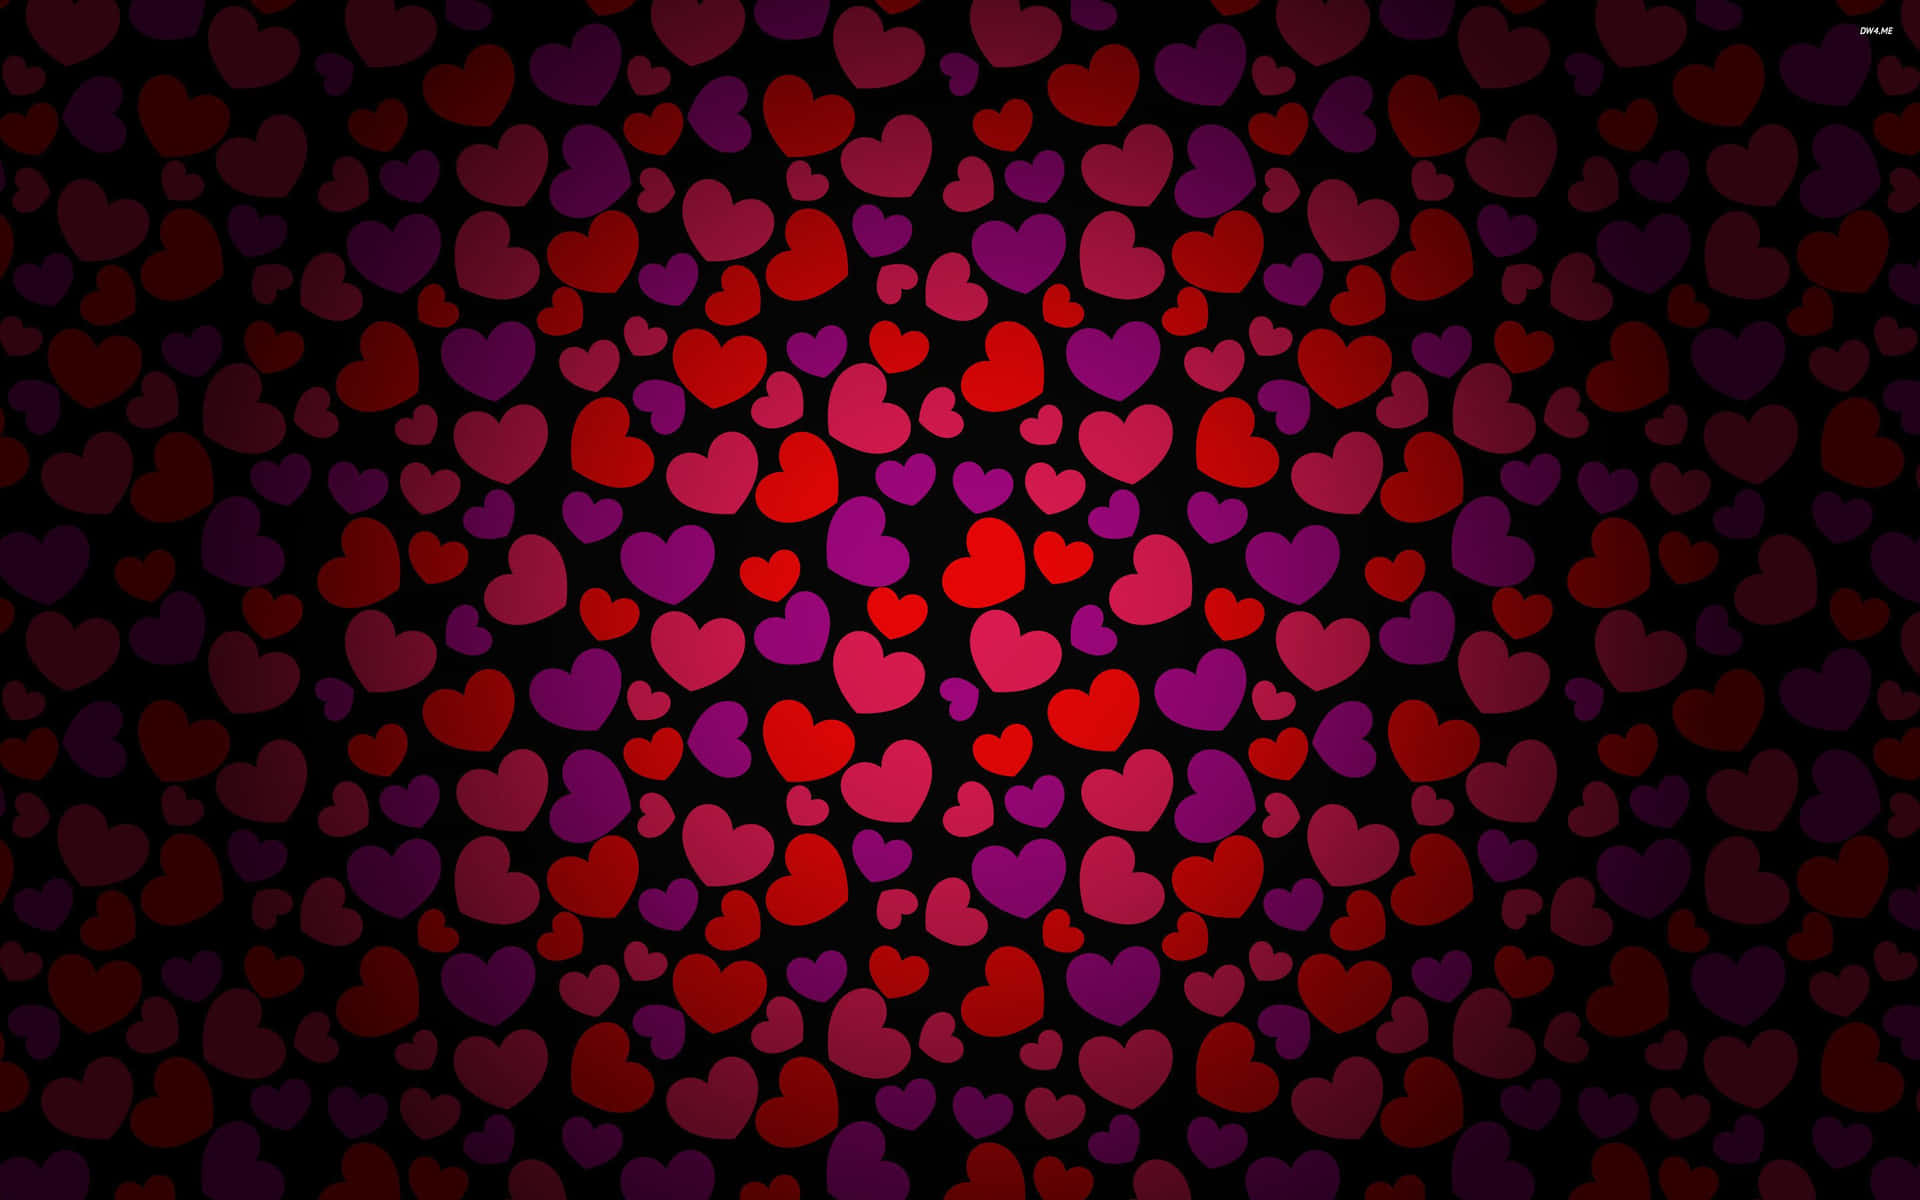 "show Some Love With A Red Heart" Wallpaper